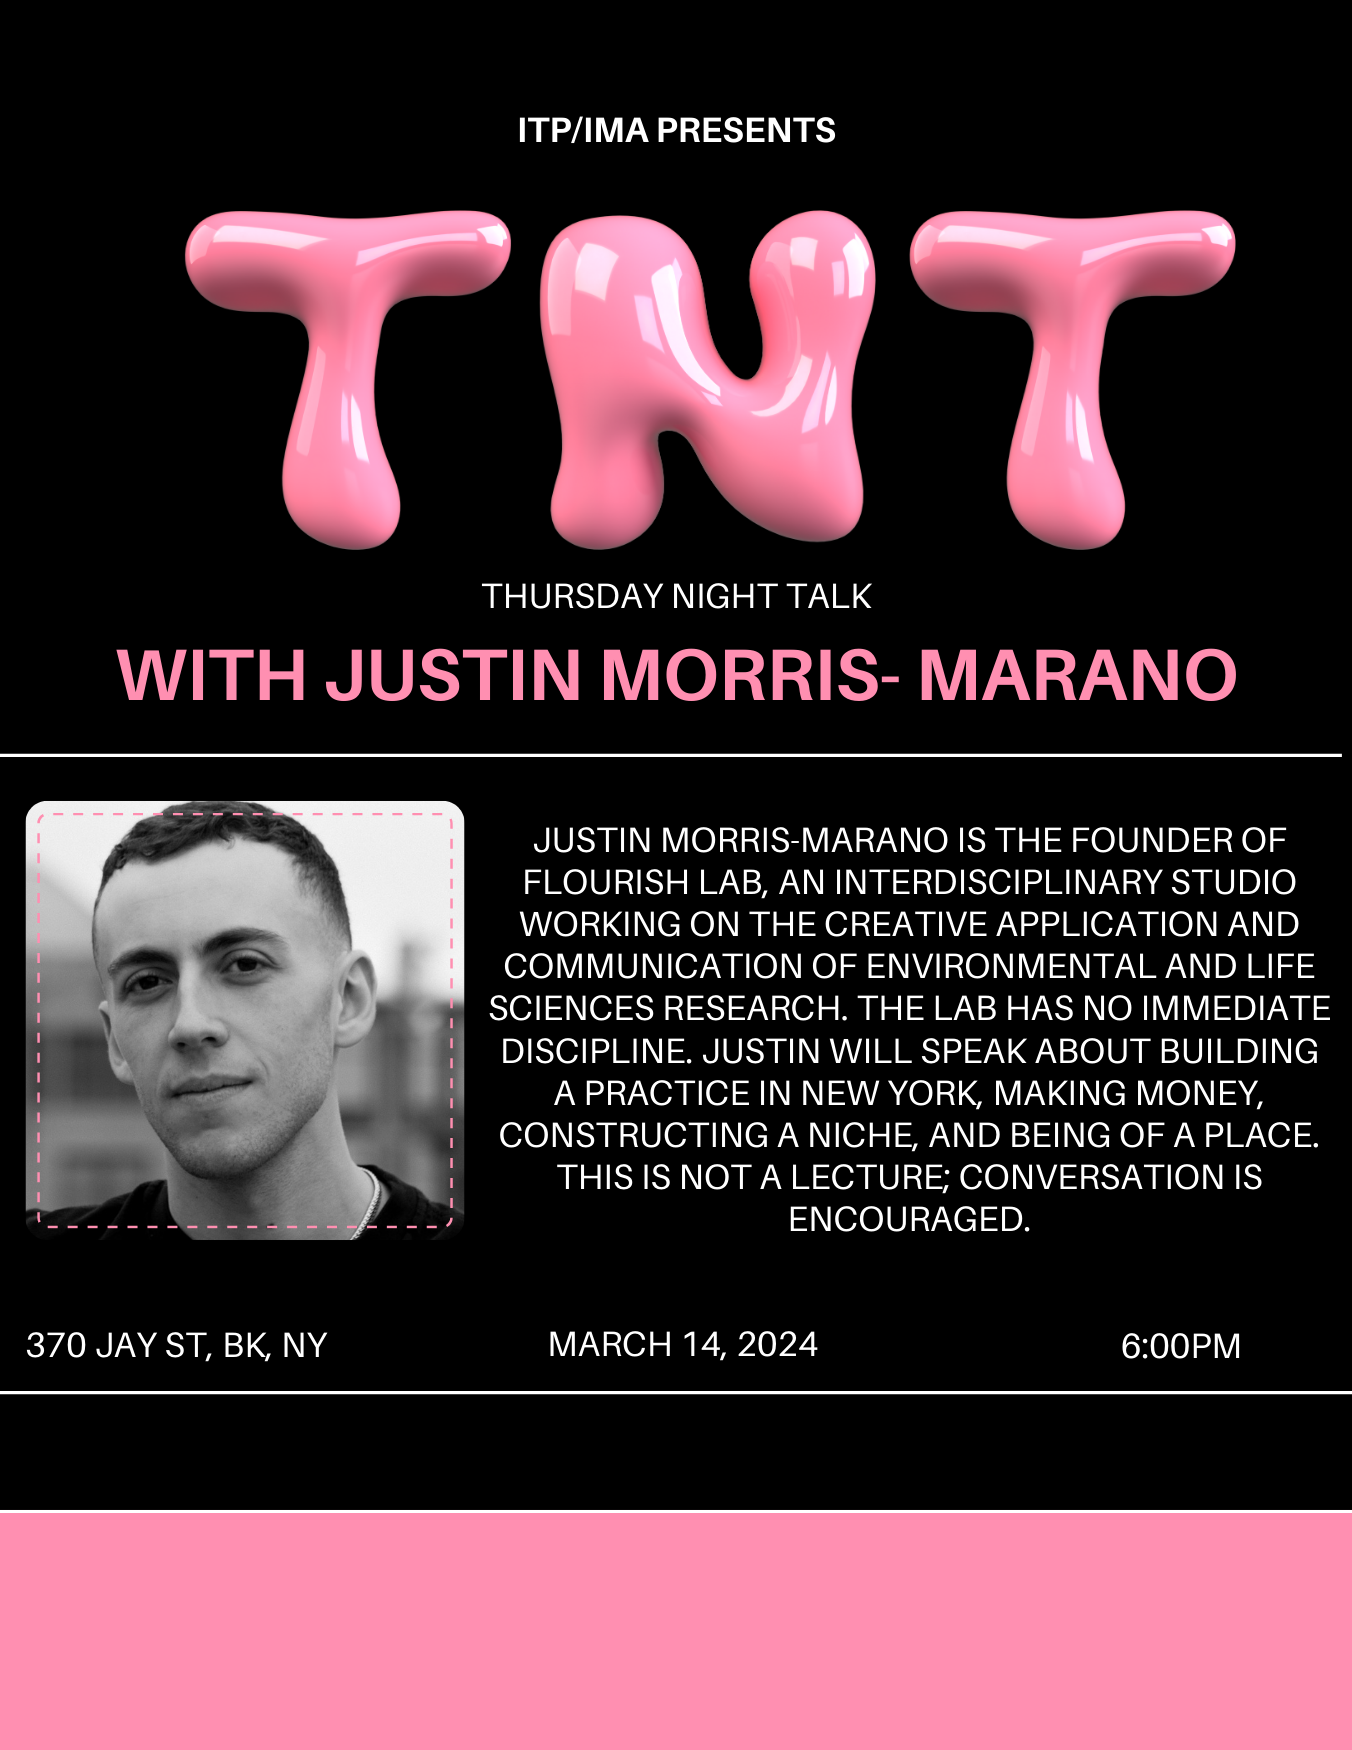 Justin Morris-Marano is the founder of Flourish LAB, an interdisciplinary studio working on the creative application and communication of environmental and life sciences research. The lab has no immediate discipline. Justin will speak about building a practice in New York, making money, constructing a niche, and being of a place. This is not a lecture; conversation is encouraged.